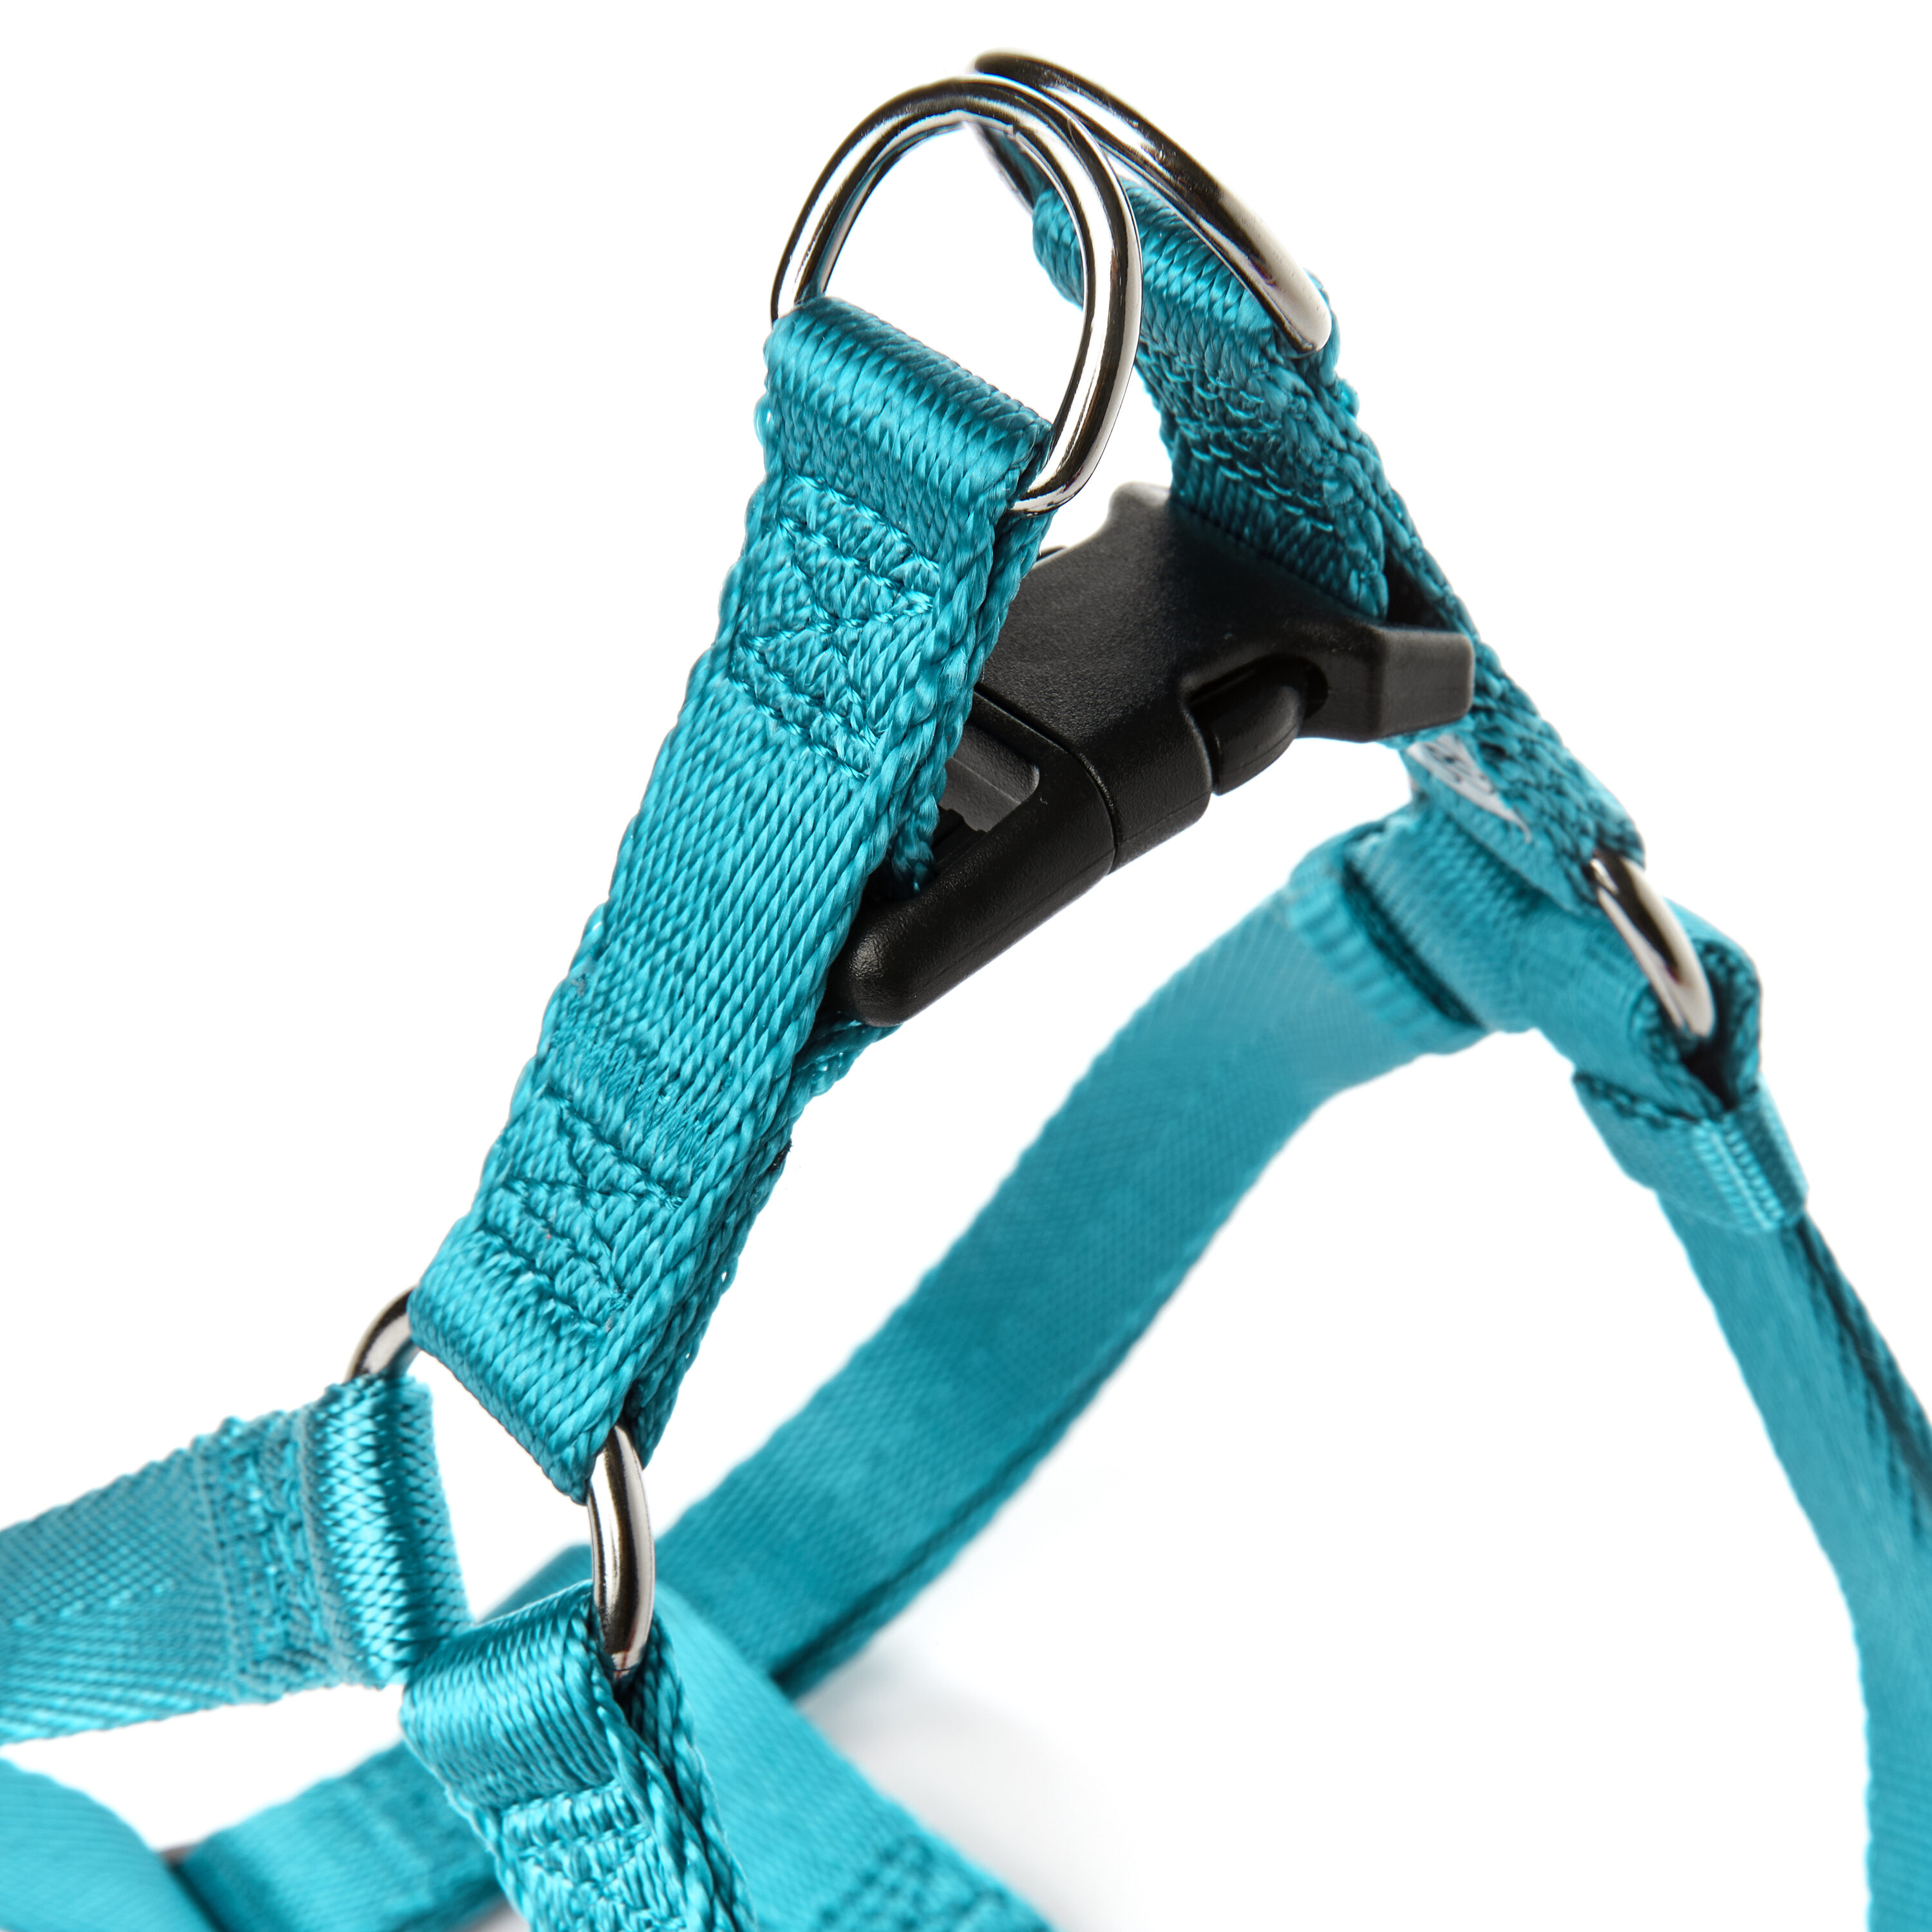 Outward Hound Boulder Adventure Adjustable Dog Harness with Pockets,  Turquoise, Small